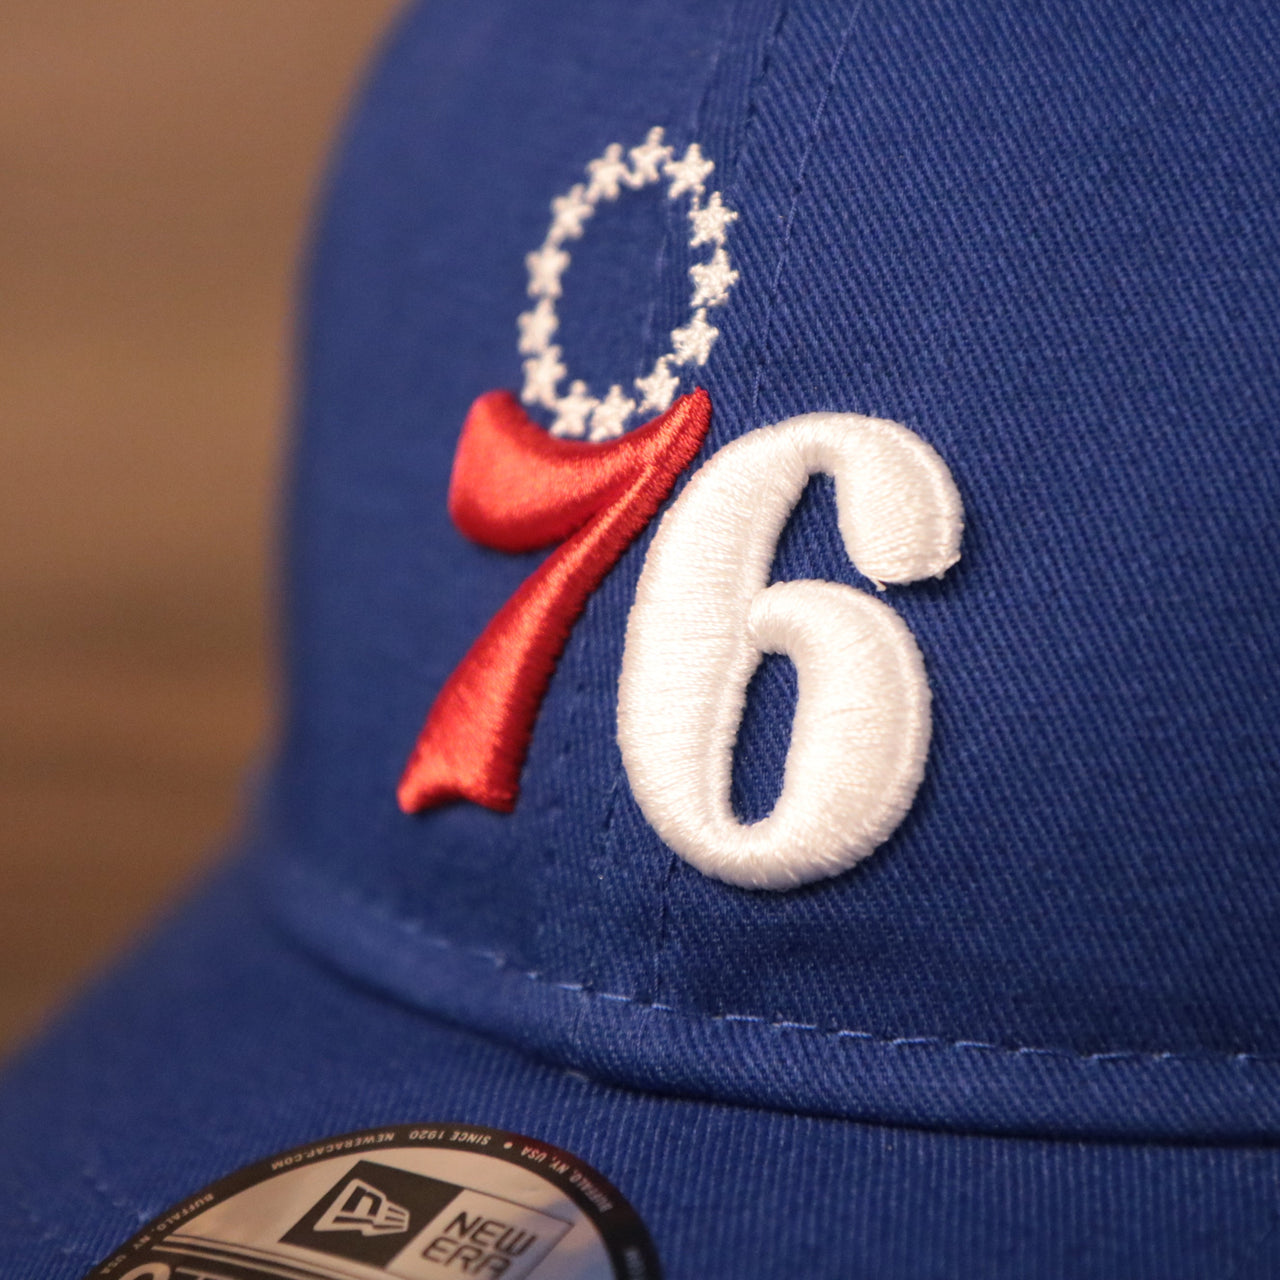 The 76ers patch on the front side of the royal blue New Era toddler baseball cap.